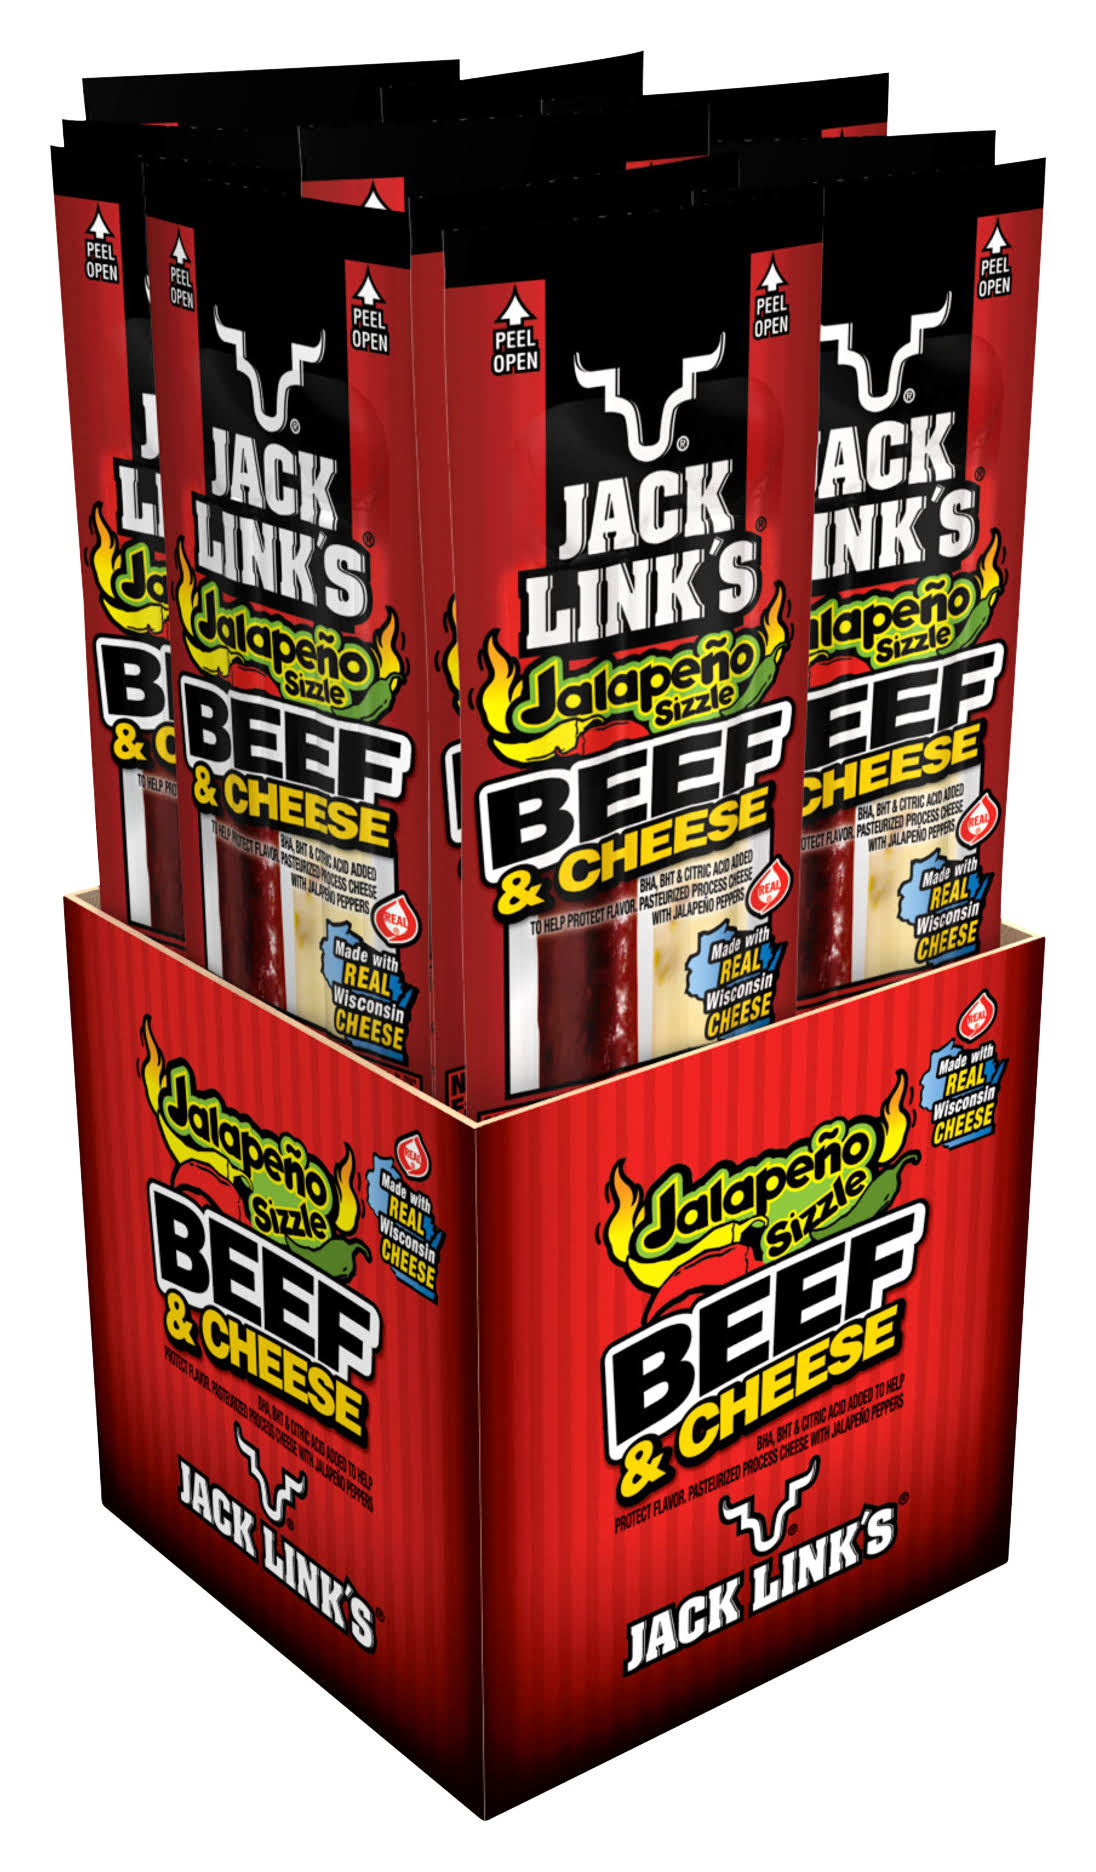 Jack Link's Jalapeno Sizzle Jerky - Beef & Cheese